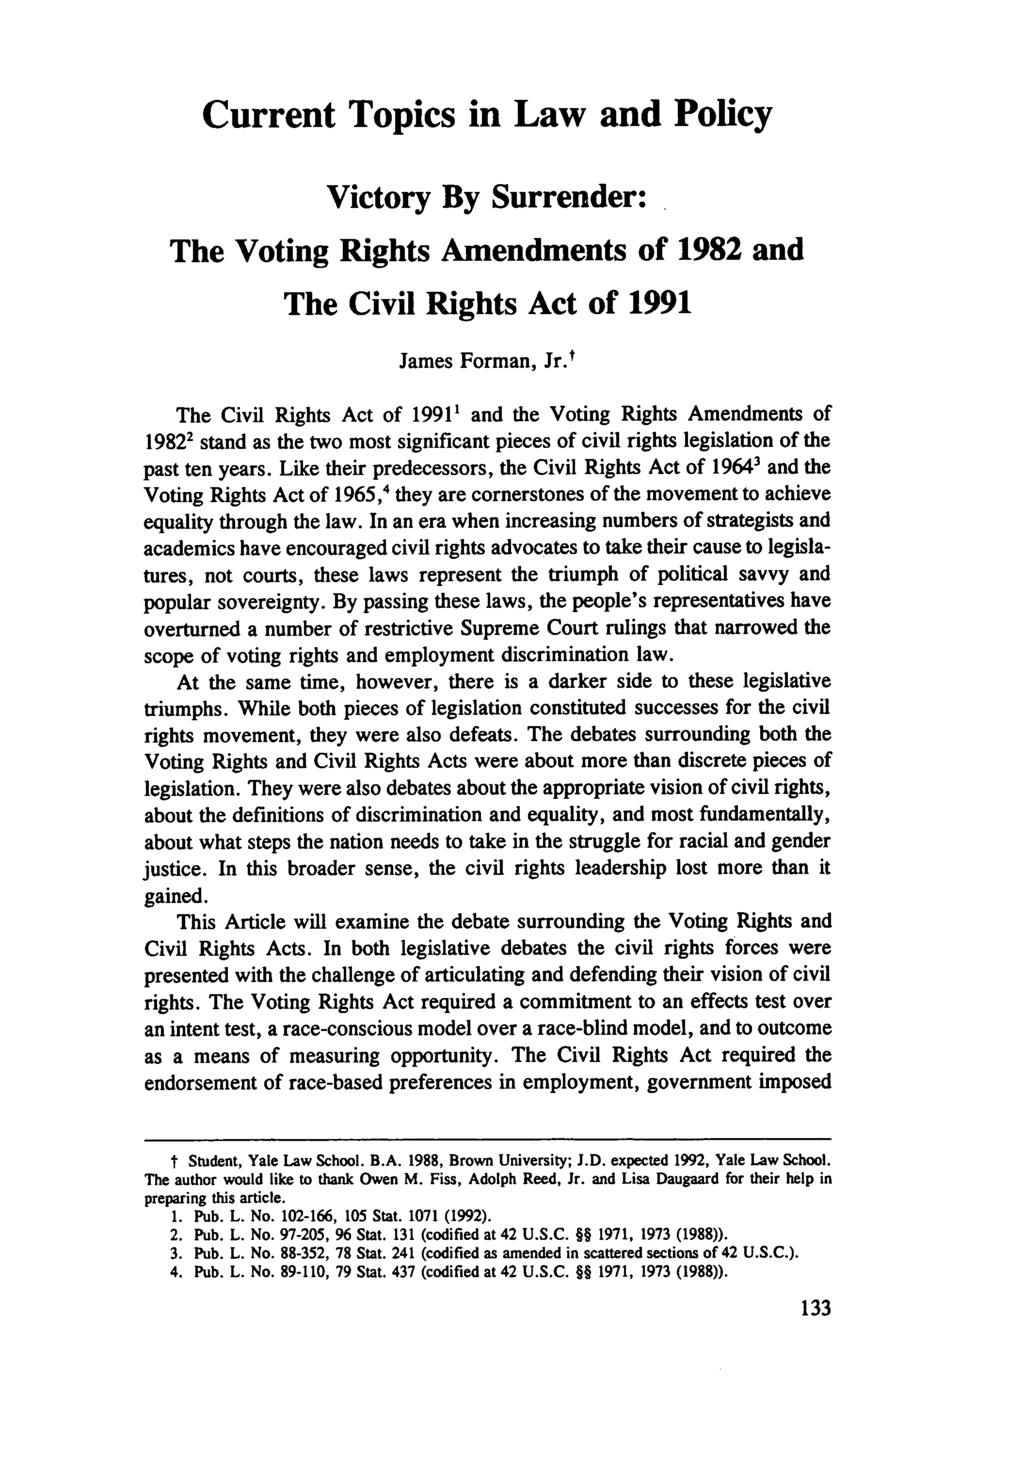 Current Topics in Law and Policy Victory By Surrender: The Voting Rights Amendments of 1982 and The Civil Rights Act of 1991 James Forman, Jr.